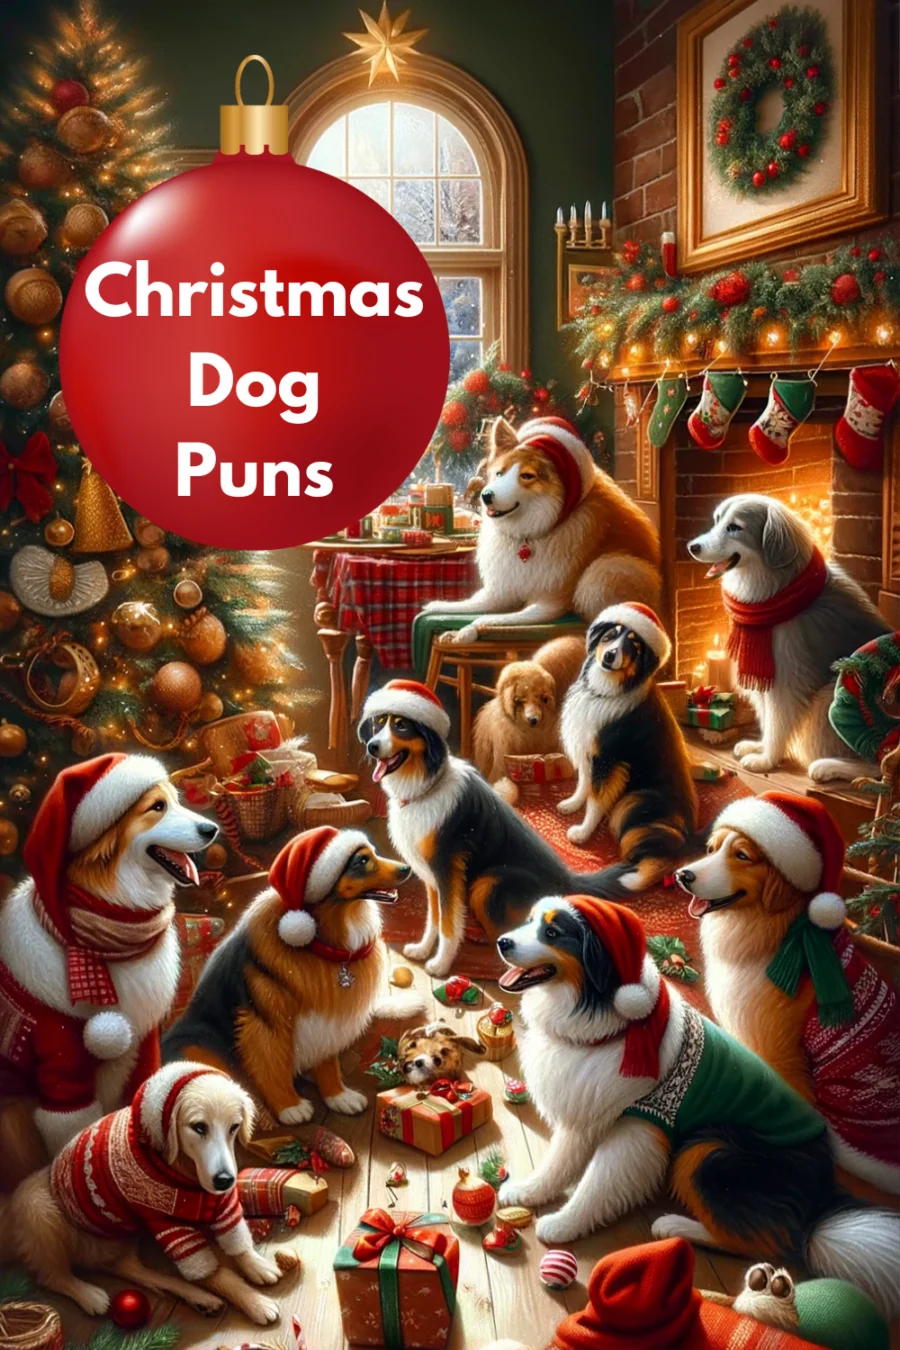 illustration of dogs around a Christmas tree with stockings hanging by the fireplace.  Words 